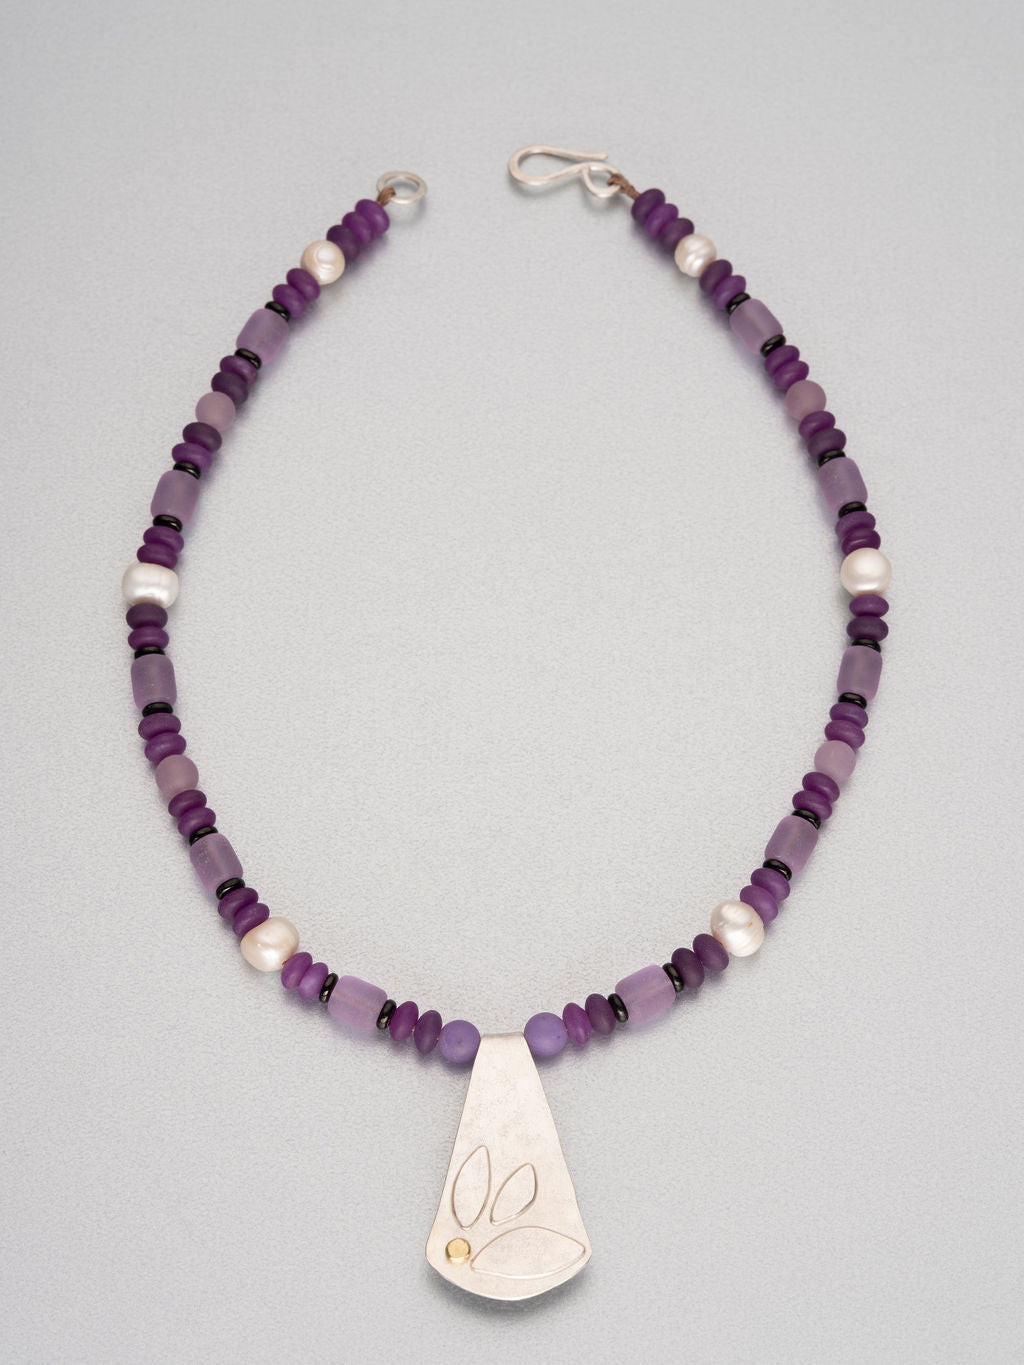 Beaded necklace with sea glass, semi-precious stones and a silver pendant with 18 ct gold detail.